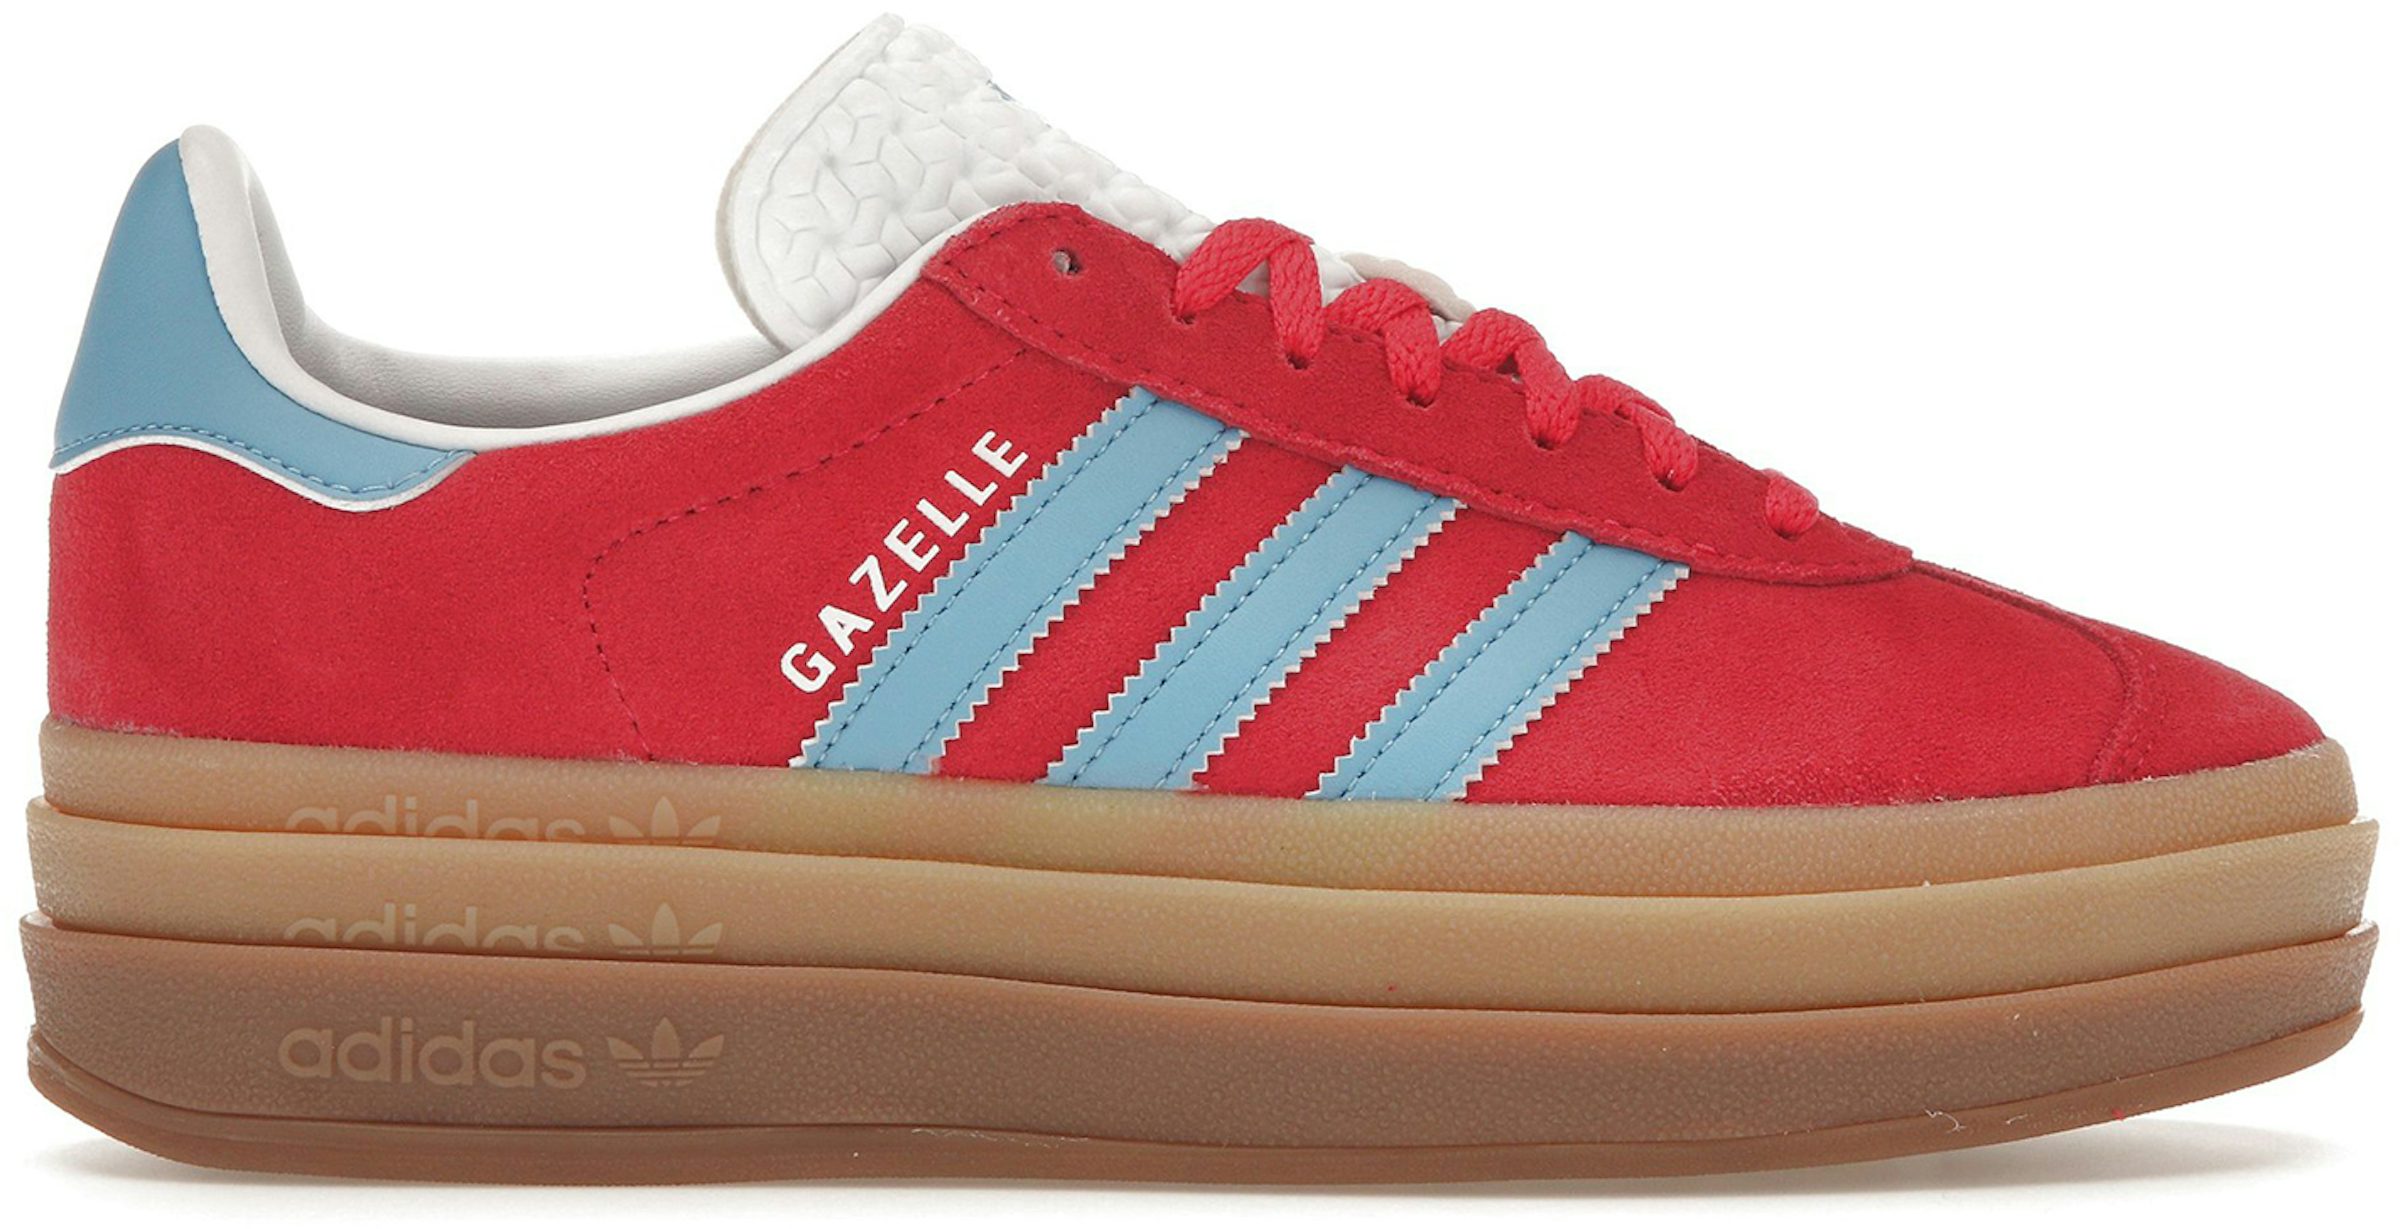 Buy adidas Shoes Sneakers & StockX - New Gazelle